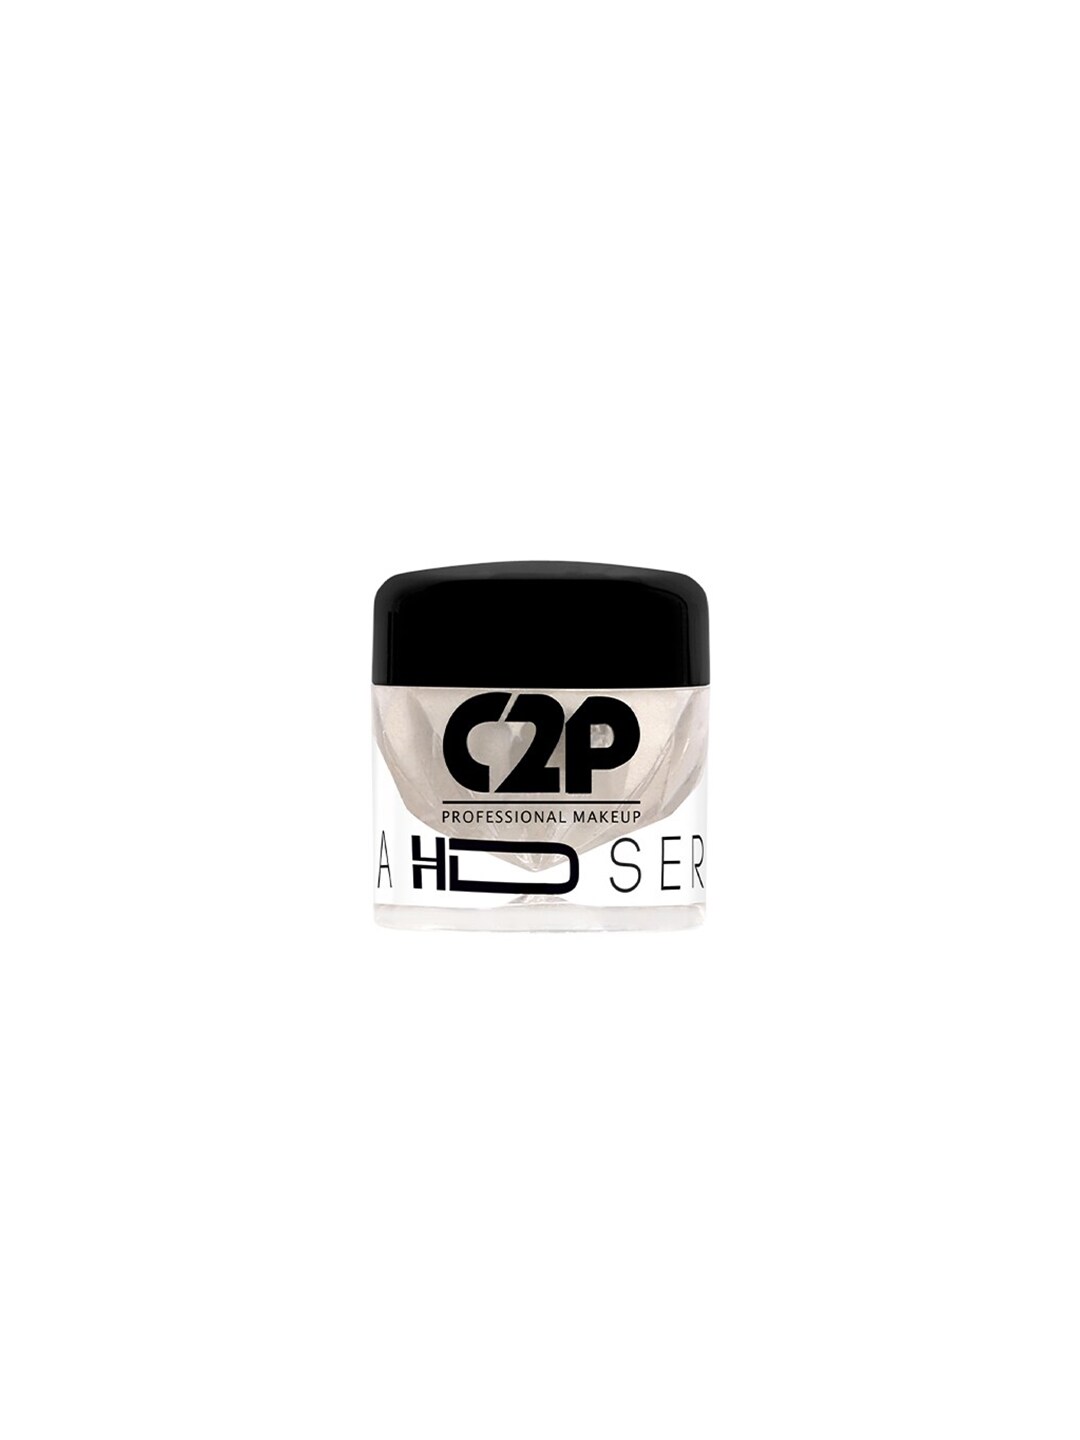 C2P PROFESSIONAL MAKEUP HD Loose Precious Pigments Eyeshadow - Wishing Bell 02 Price in India